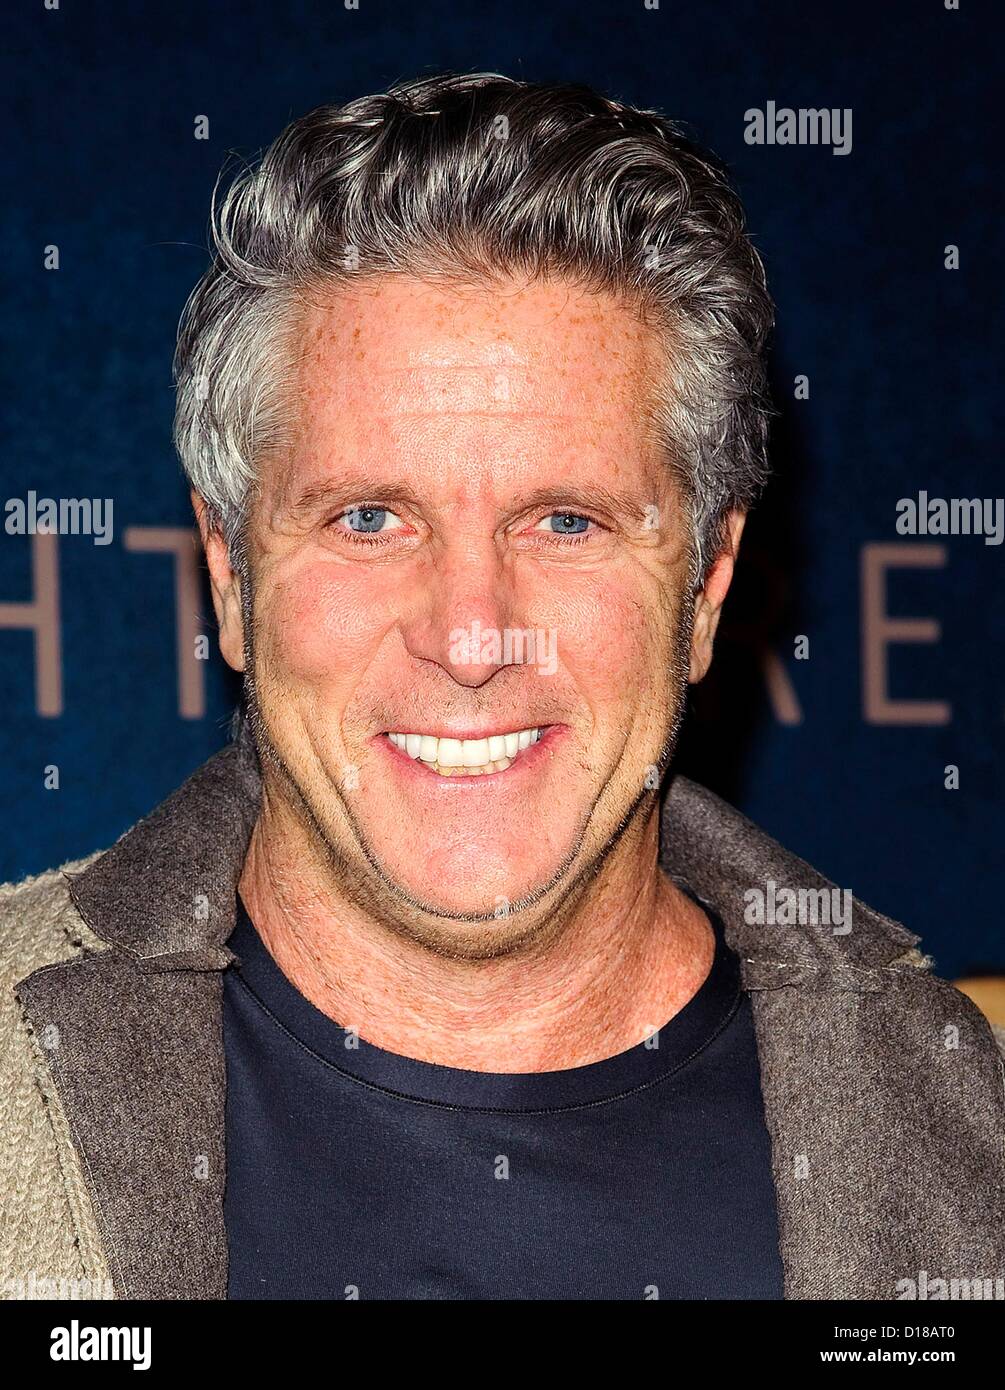 Donny Deutsch at arrivals for LES MISERABLES Premiere, The Ziegfeld Theatre, New York, NY December 10, 2012. Photo By: Lee/Everett Collection/Alamy Live News Stock Photo